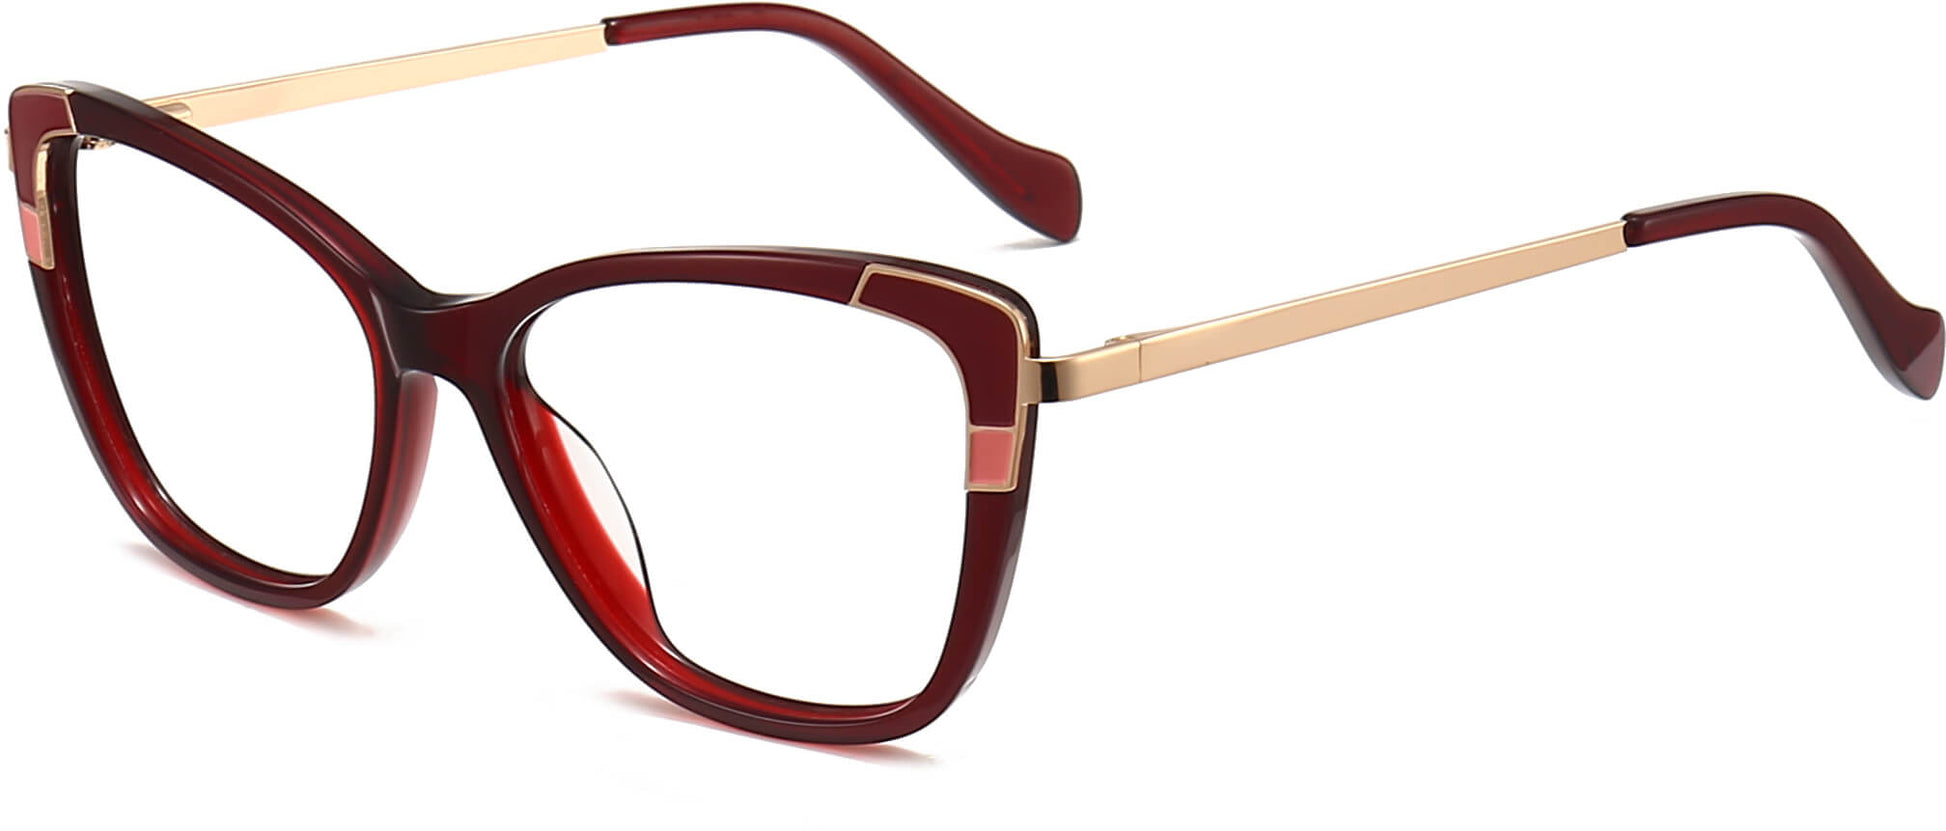 Dulce Cateye Red Eyeglasses from ANRRI, angle view